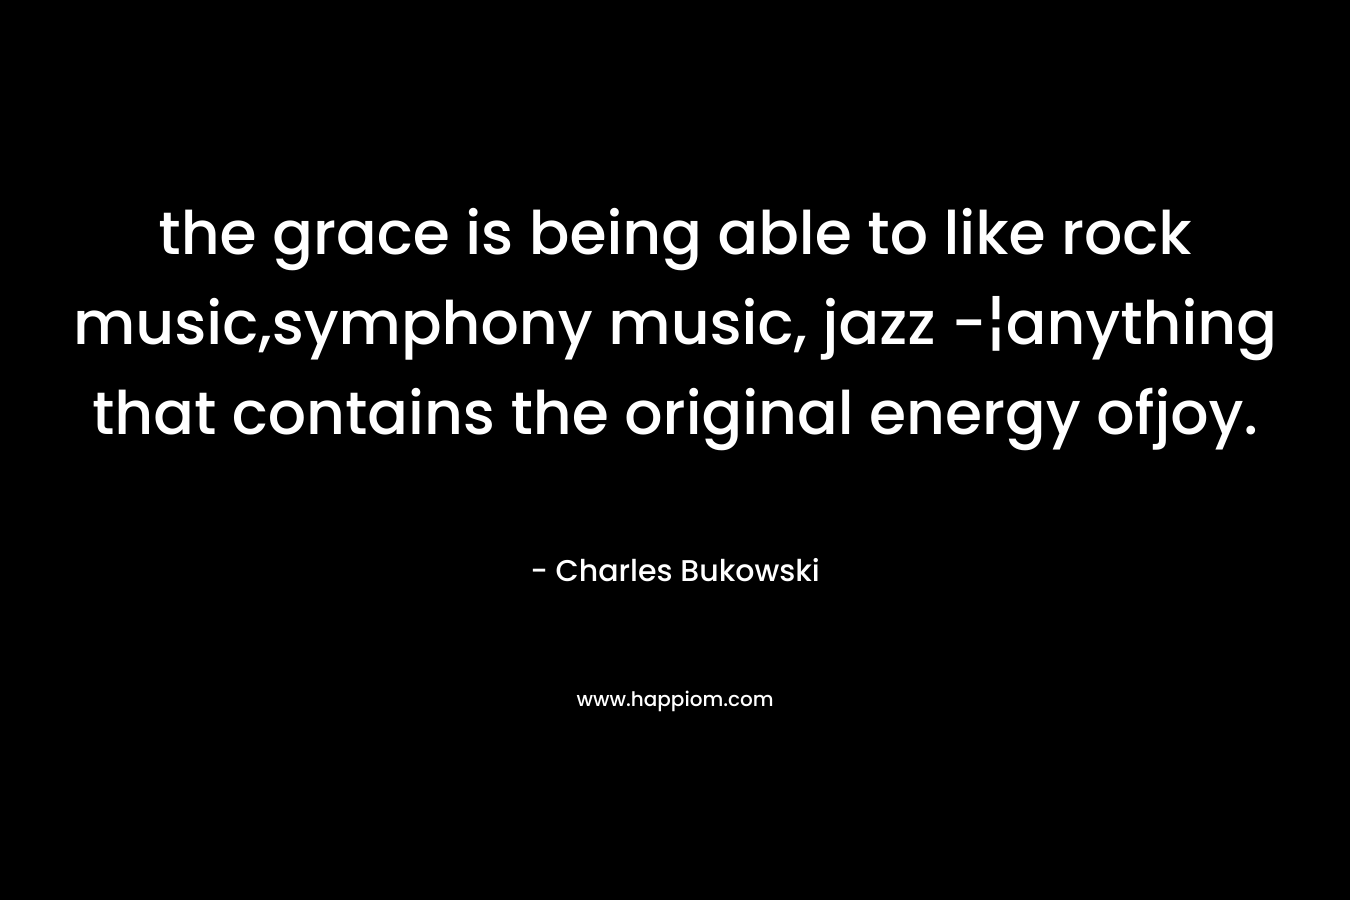 the grace is being able to like rock music,symphony music, jazz -¦anything that contains the original energy ofjoy. – Charles Bukowski